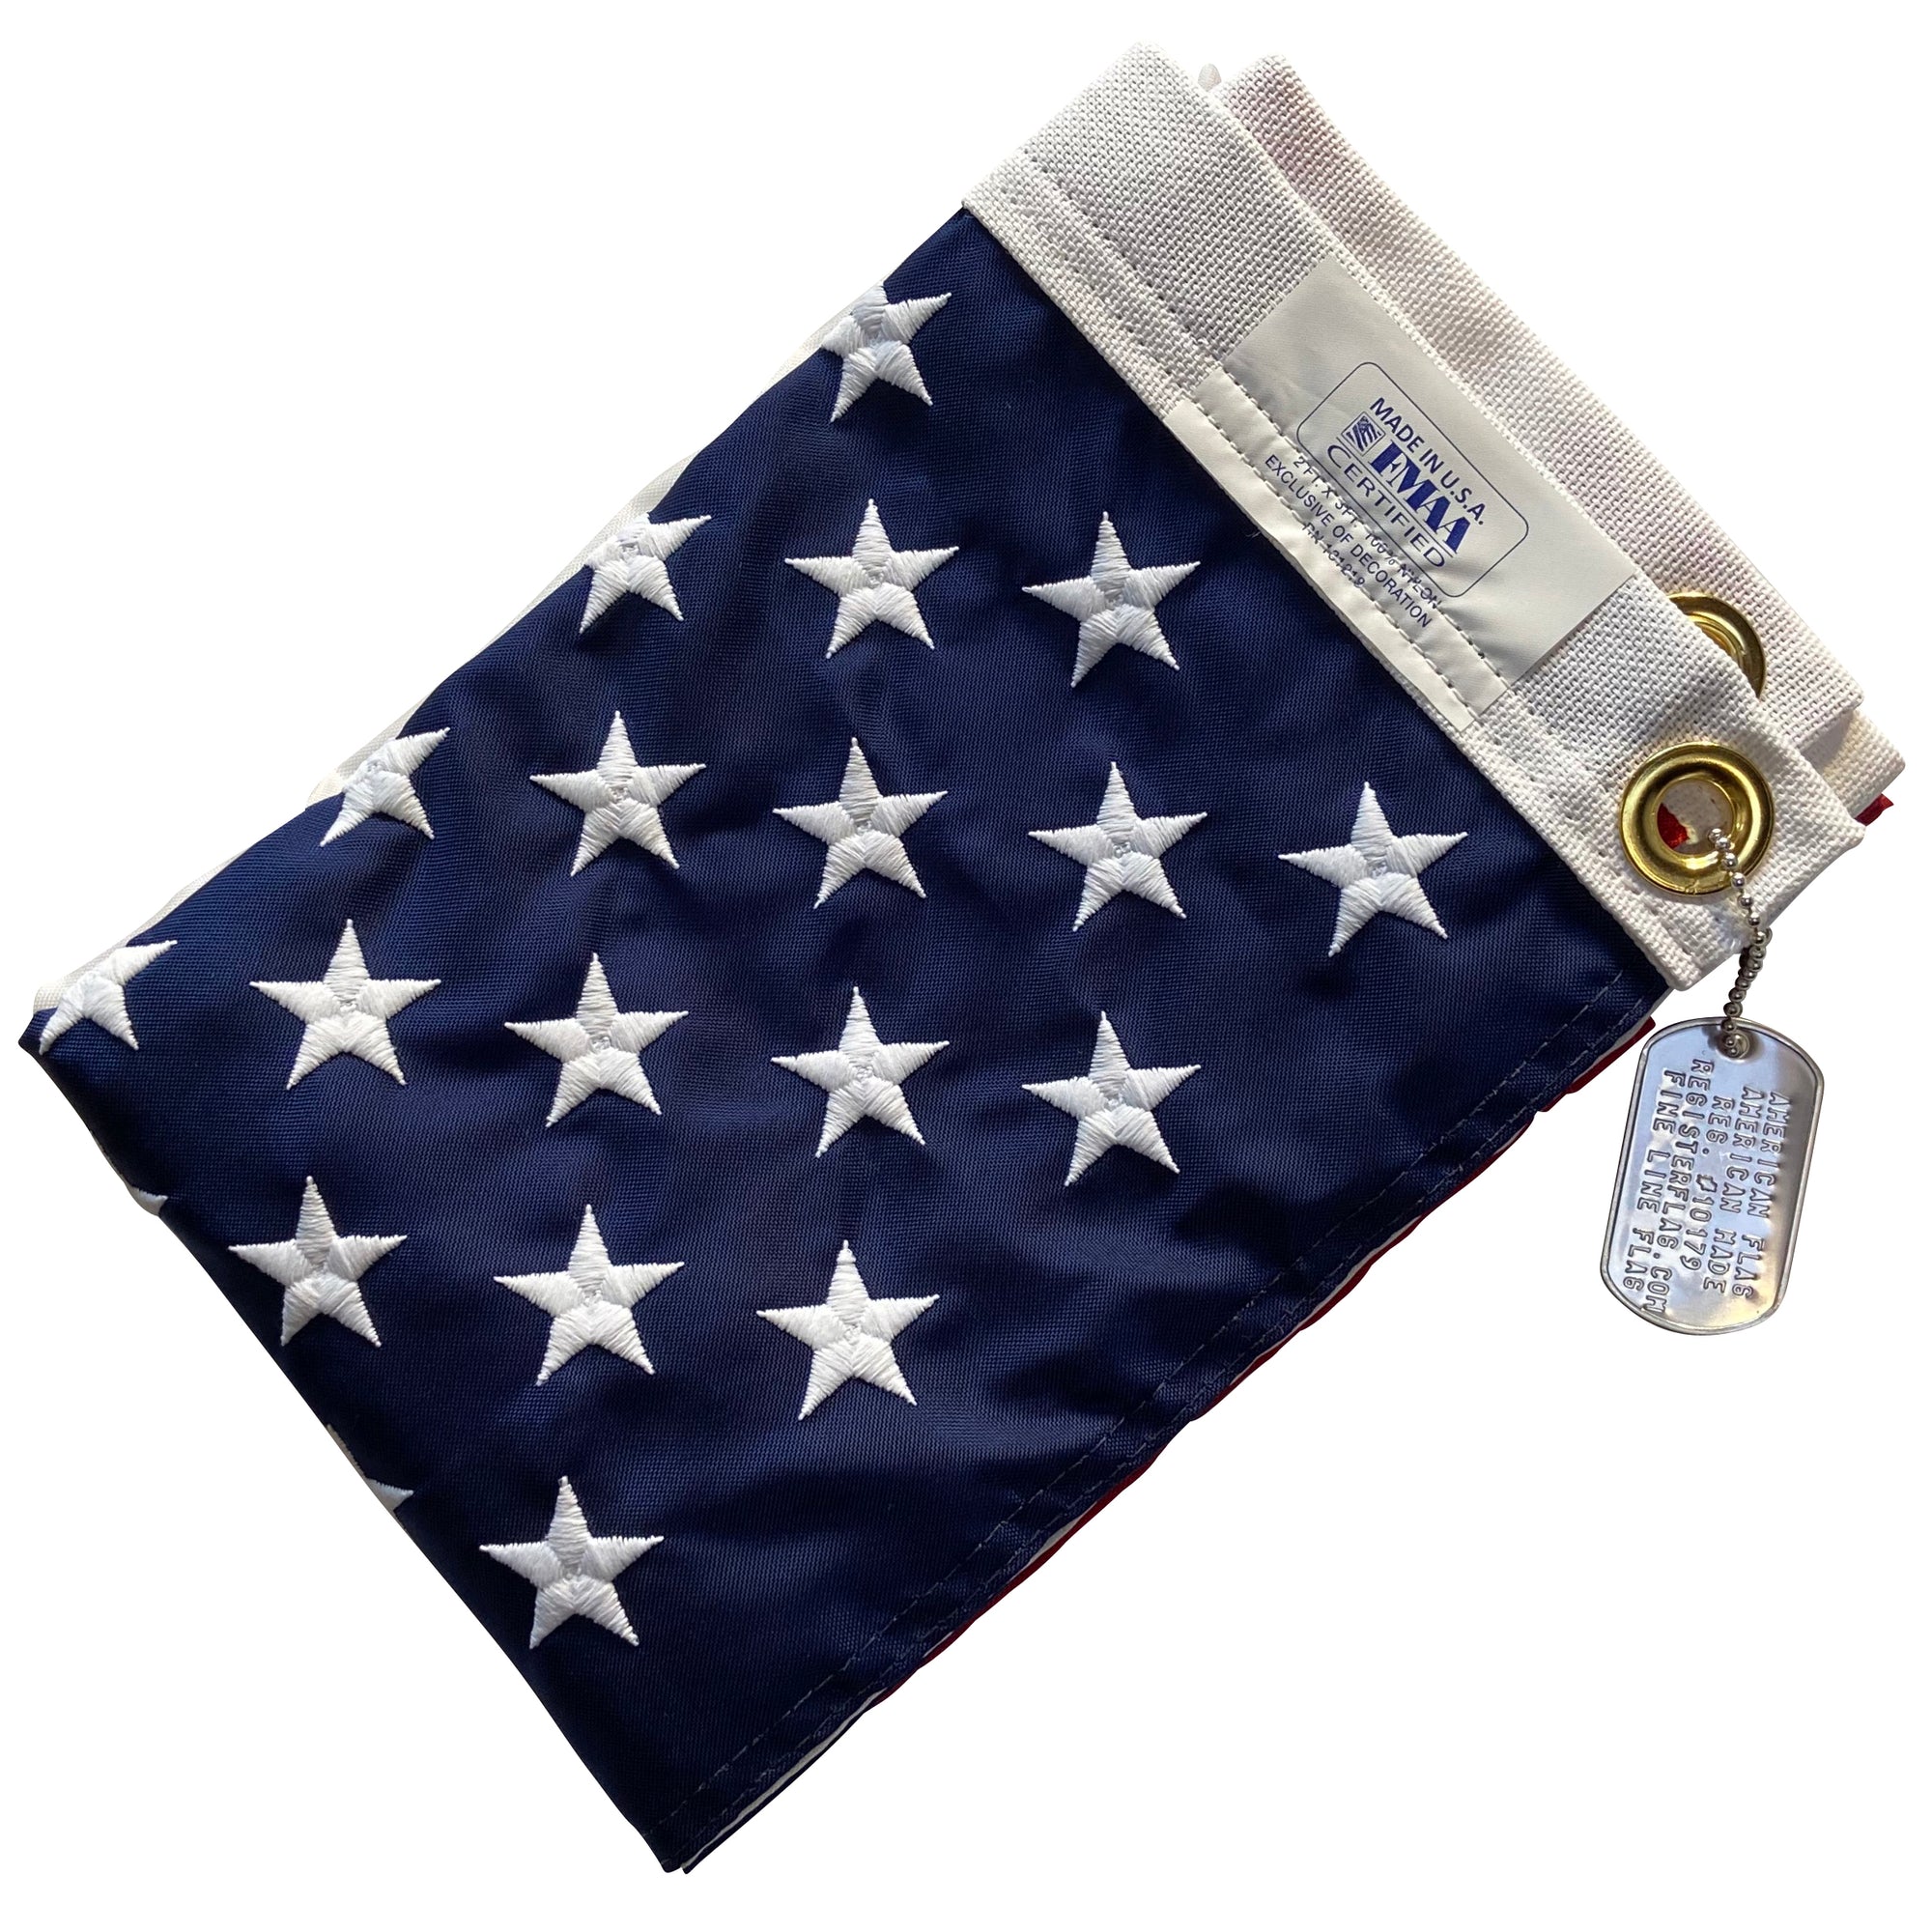 The Sergeant 2x3 American Flag - Made in USA